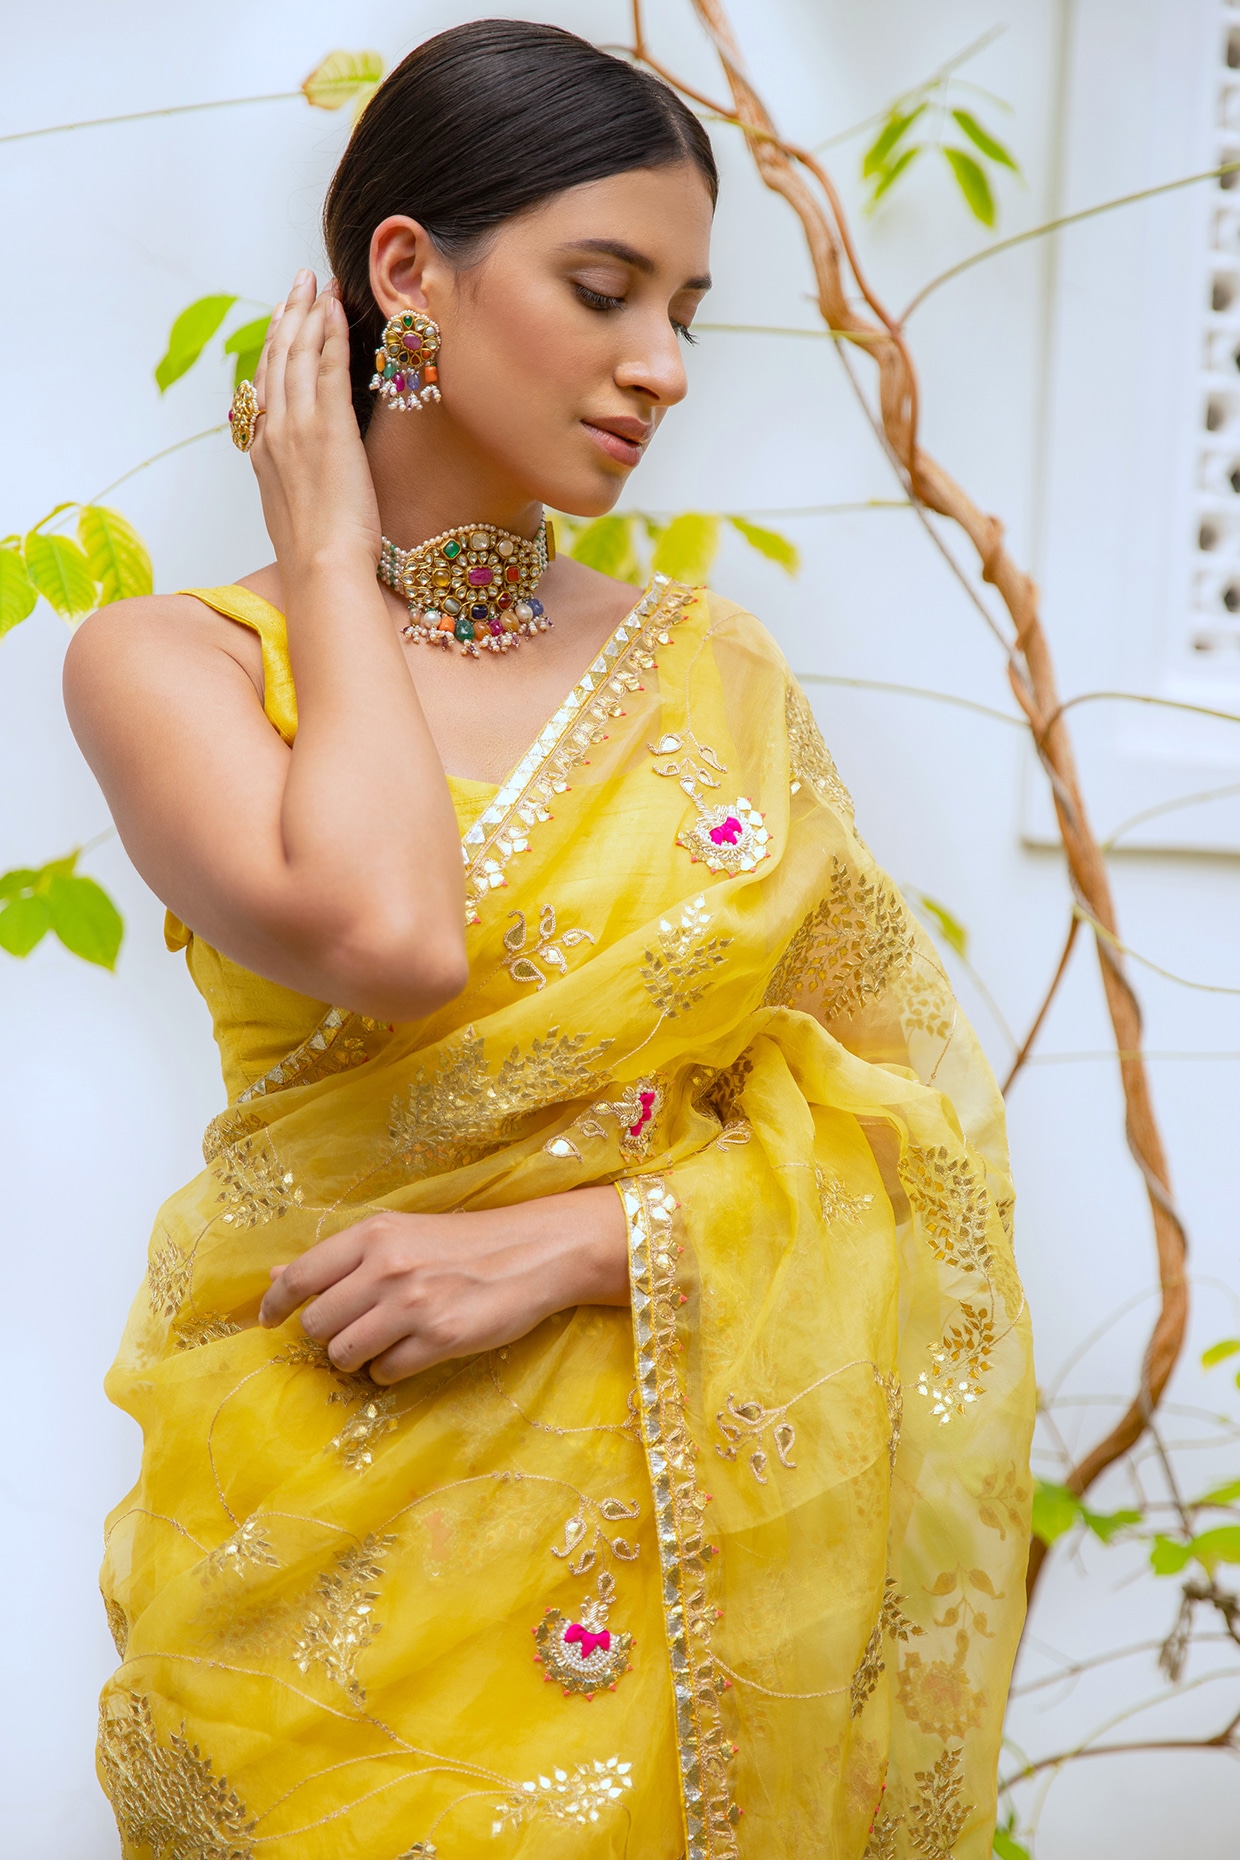 Which jewelry can I wear with my yellow saree for my engagement? - Quora